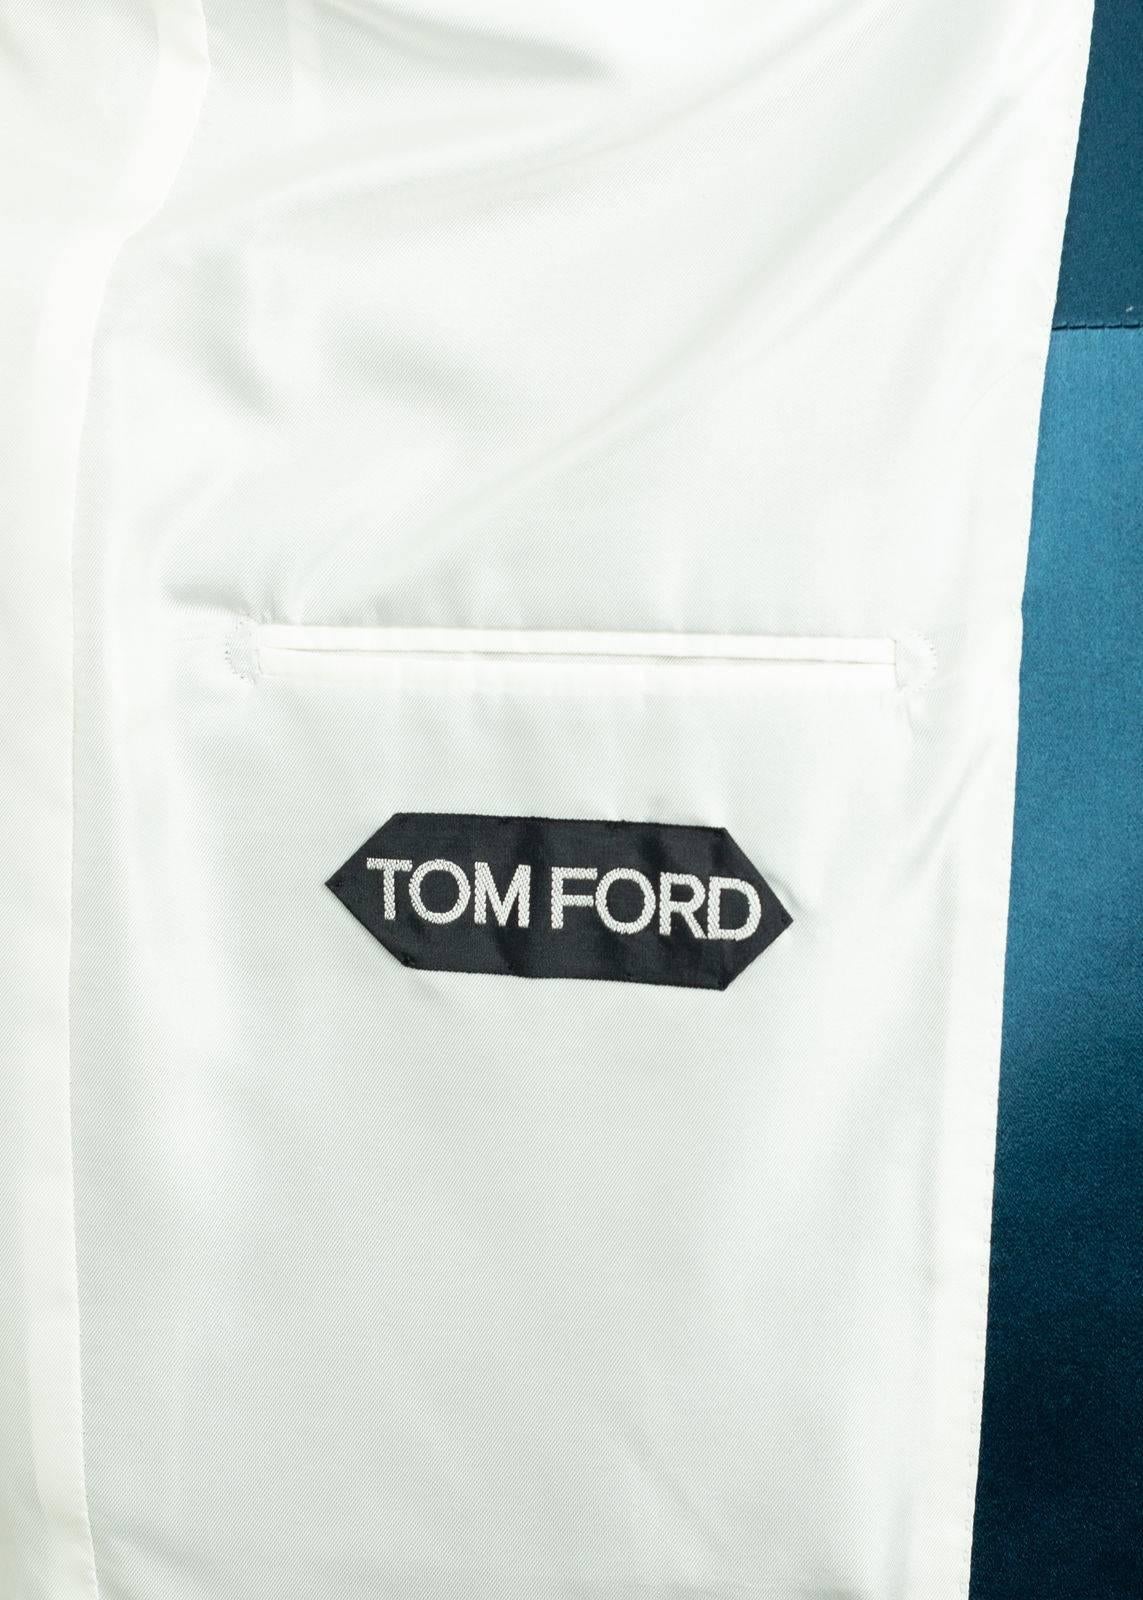 Invite all pleasurable eyes in with your Tom Ford Velvet Jacket. This strikingly smooth Shelton features a satin shawl lapel, silk blended interior, and concealed sleeve hem closure. You can pair this suave unit with and all white ensemble for